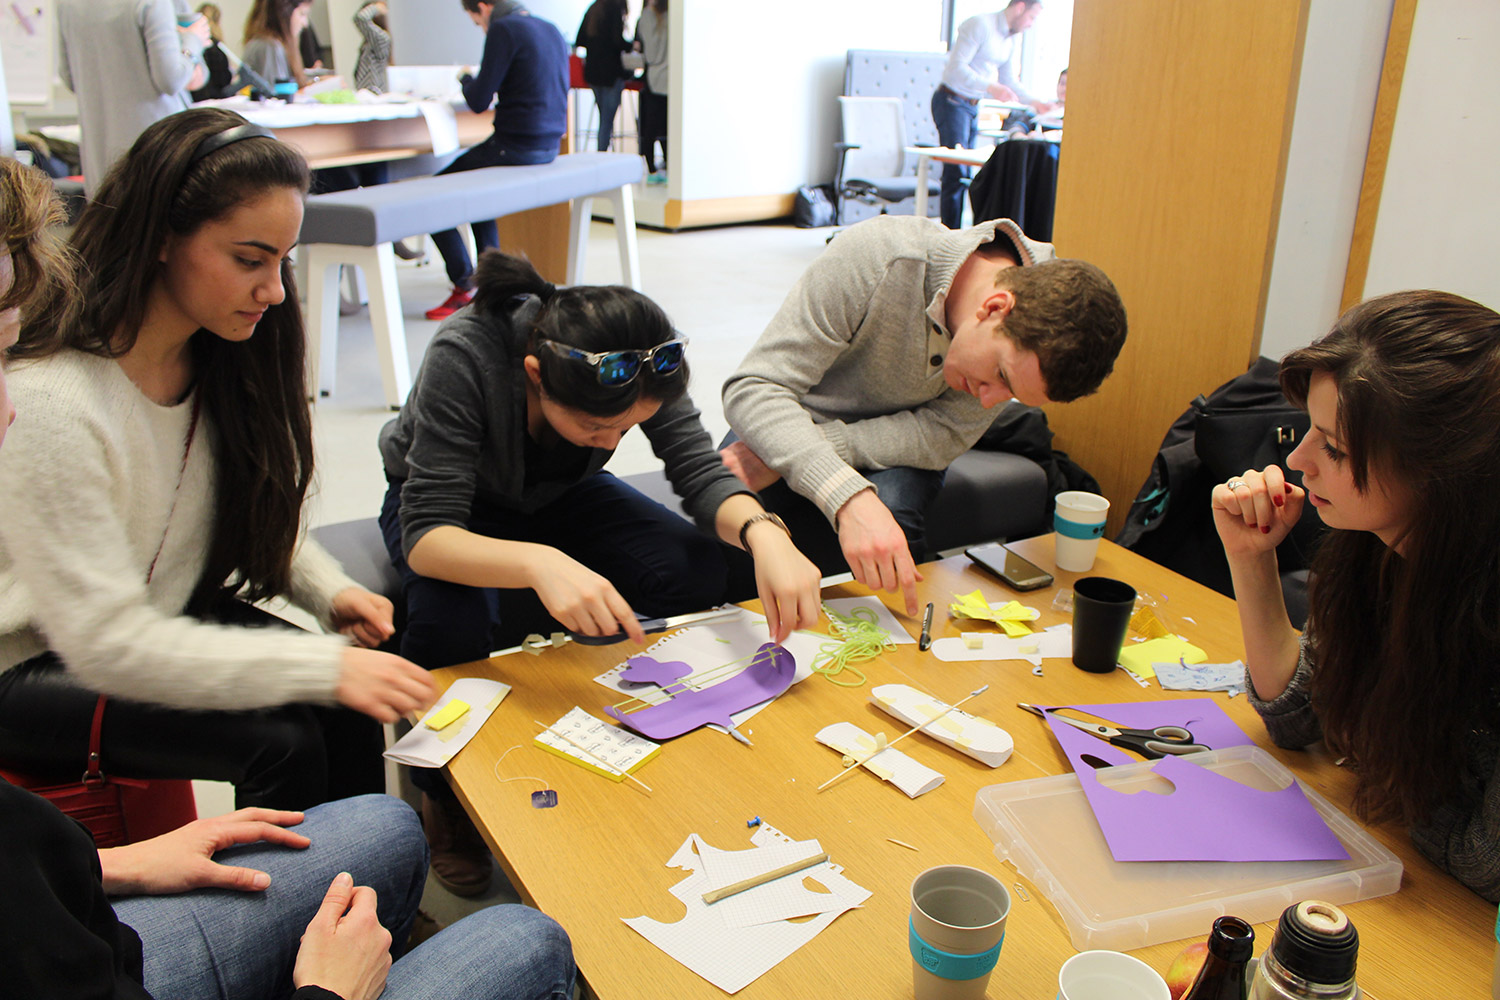 Group of students gathered around a table and working on prototyping